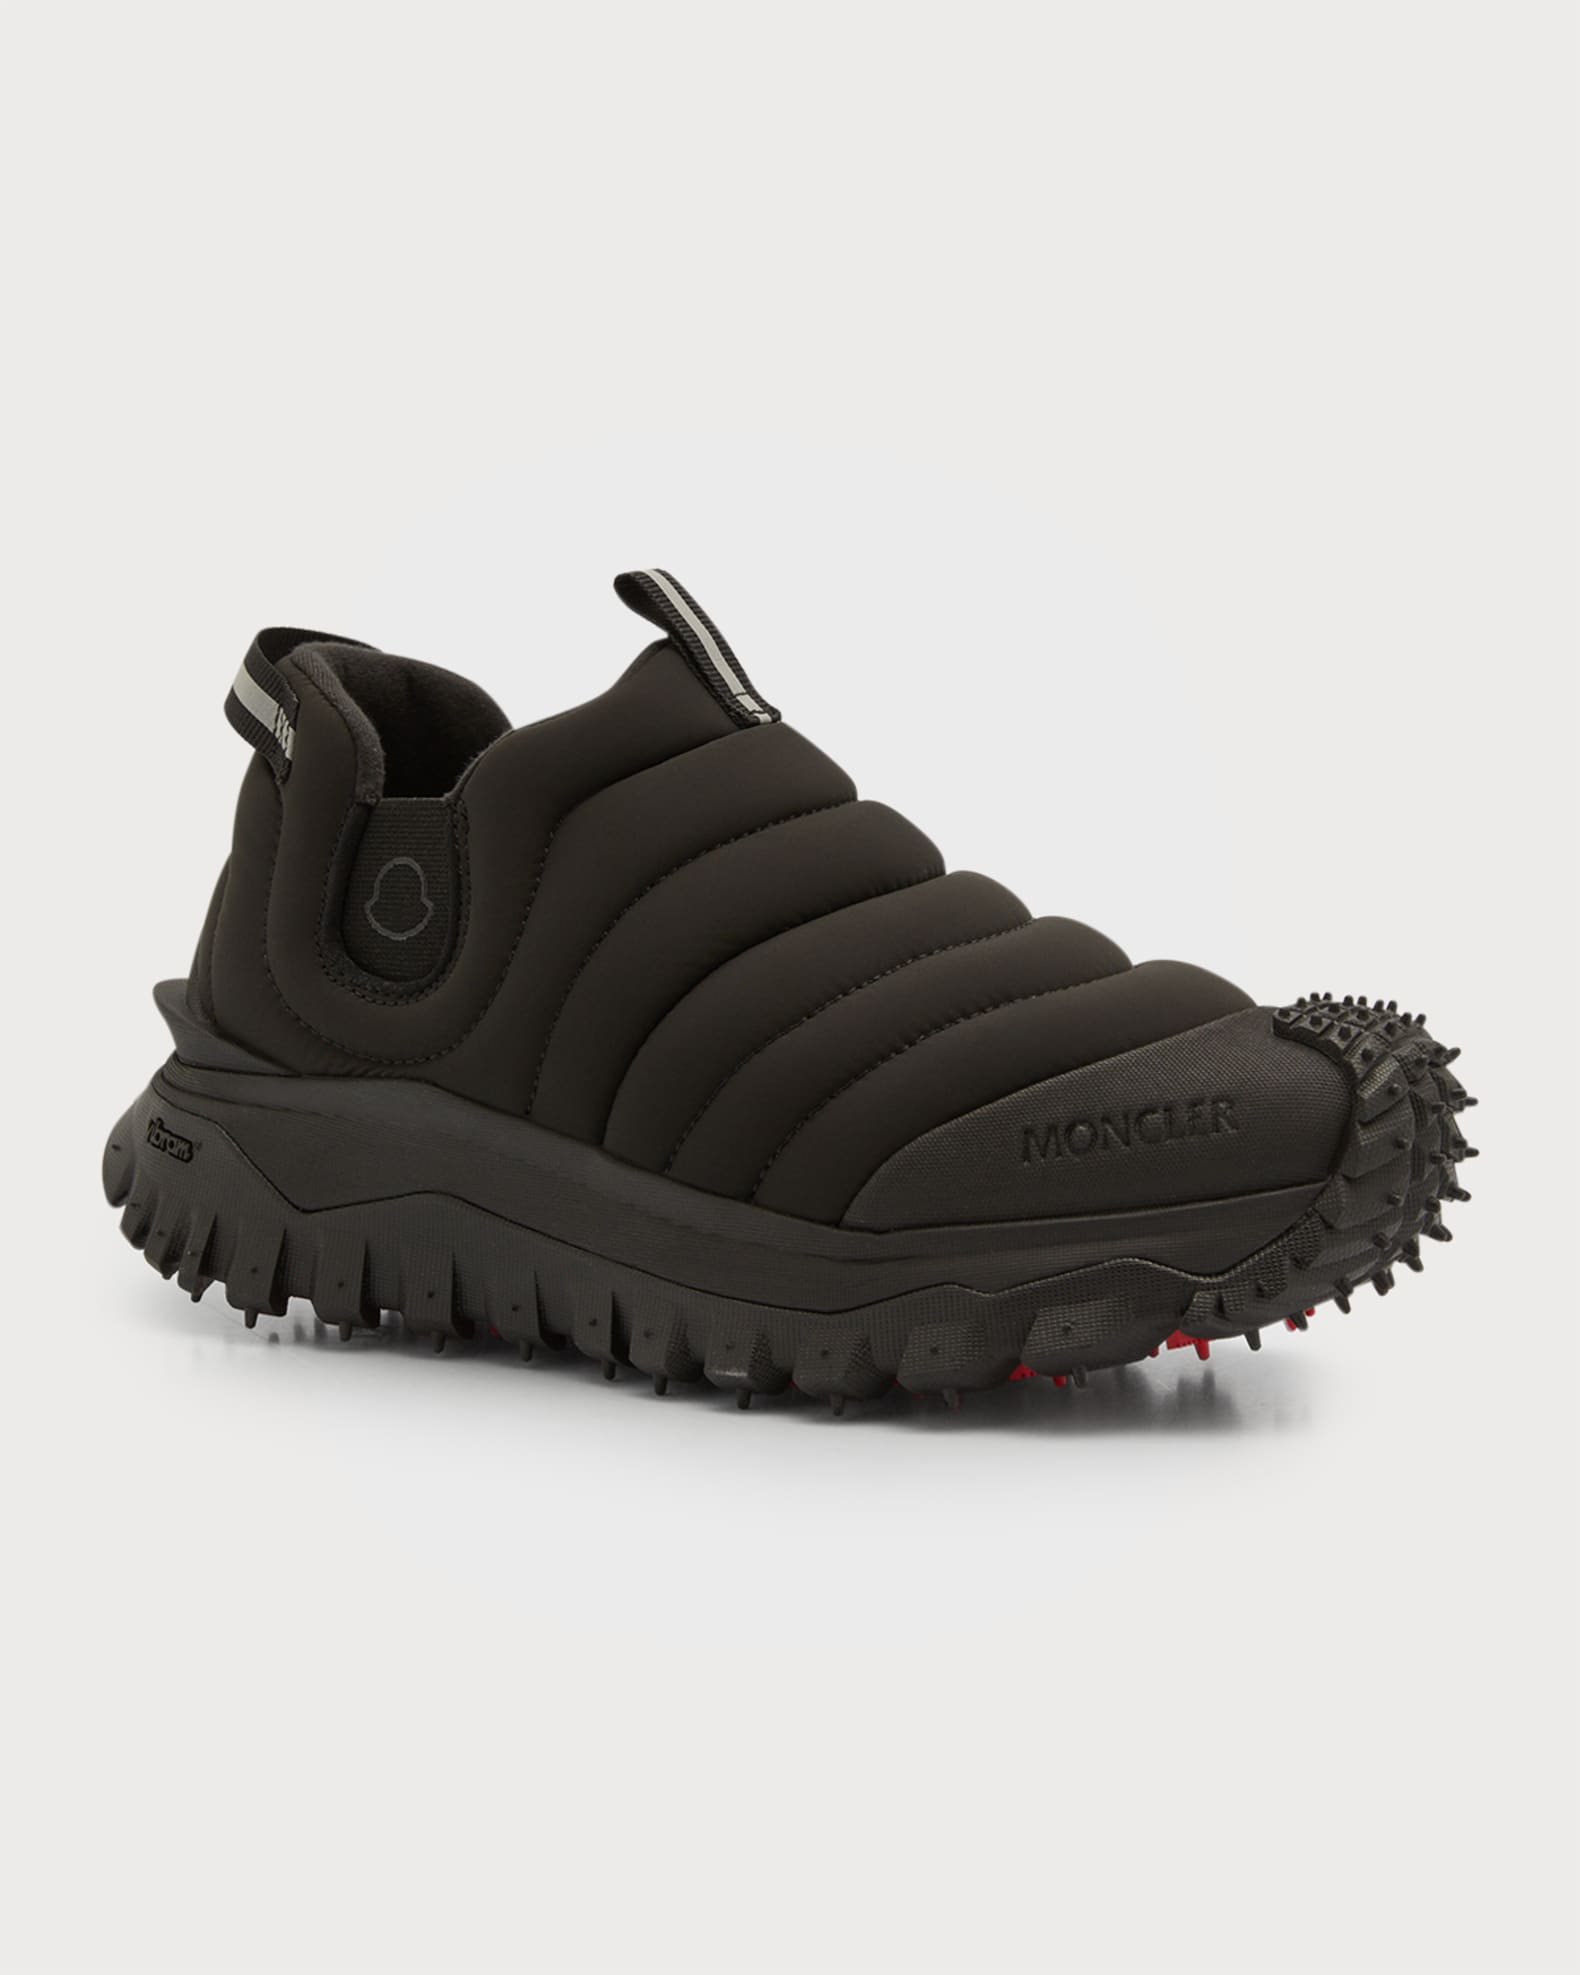 Moncler Apres Trail Quilted Pull-On Sneakers | Neiman Marcus